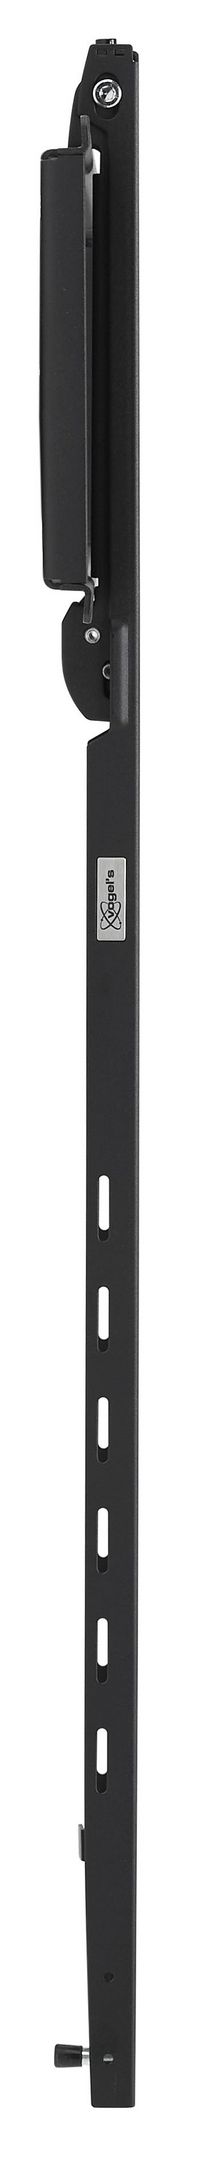 Vogel's PFW 6900 DISPLAY WALL MOUNT FIXED - W126186681